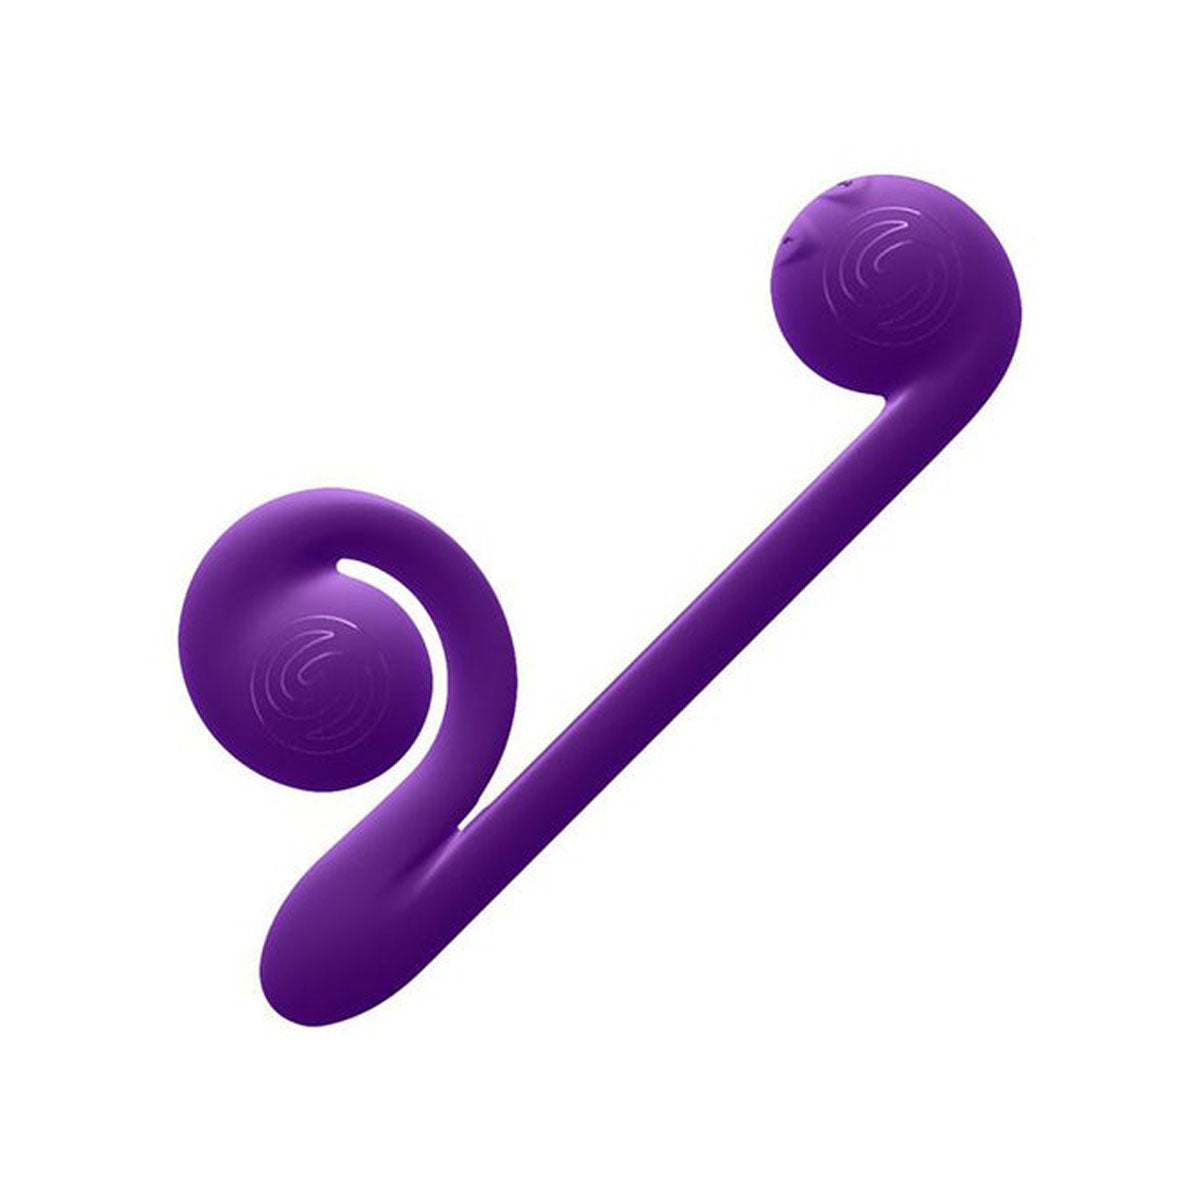 Purple silicone vibrator with two stimulation heads Nudie Co